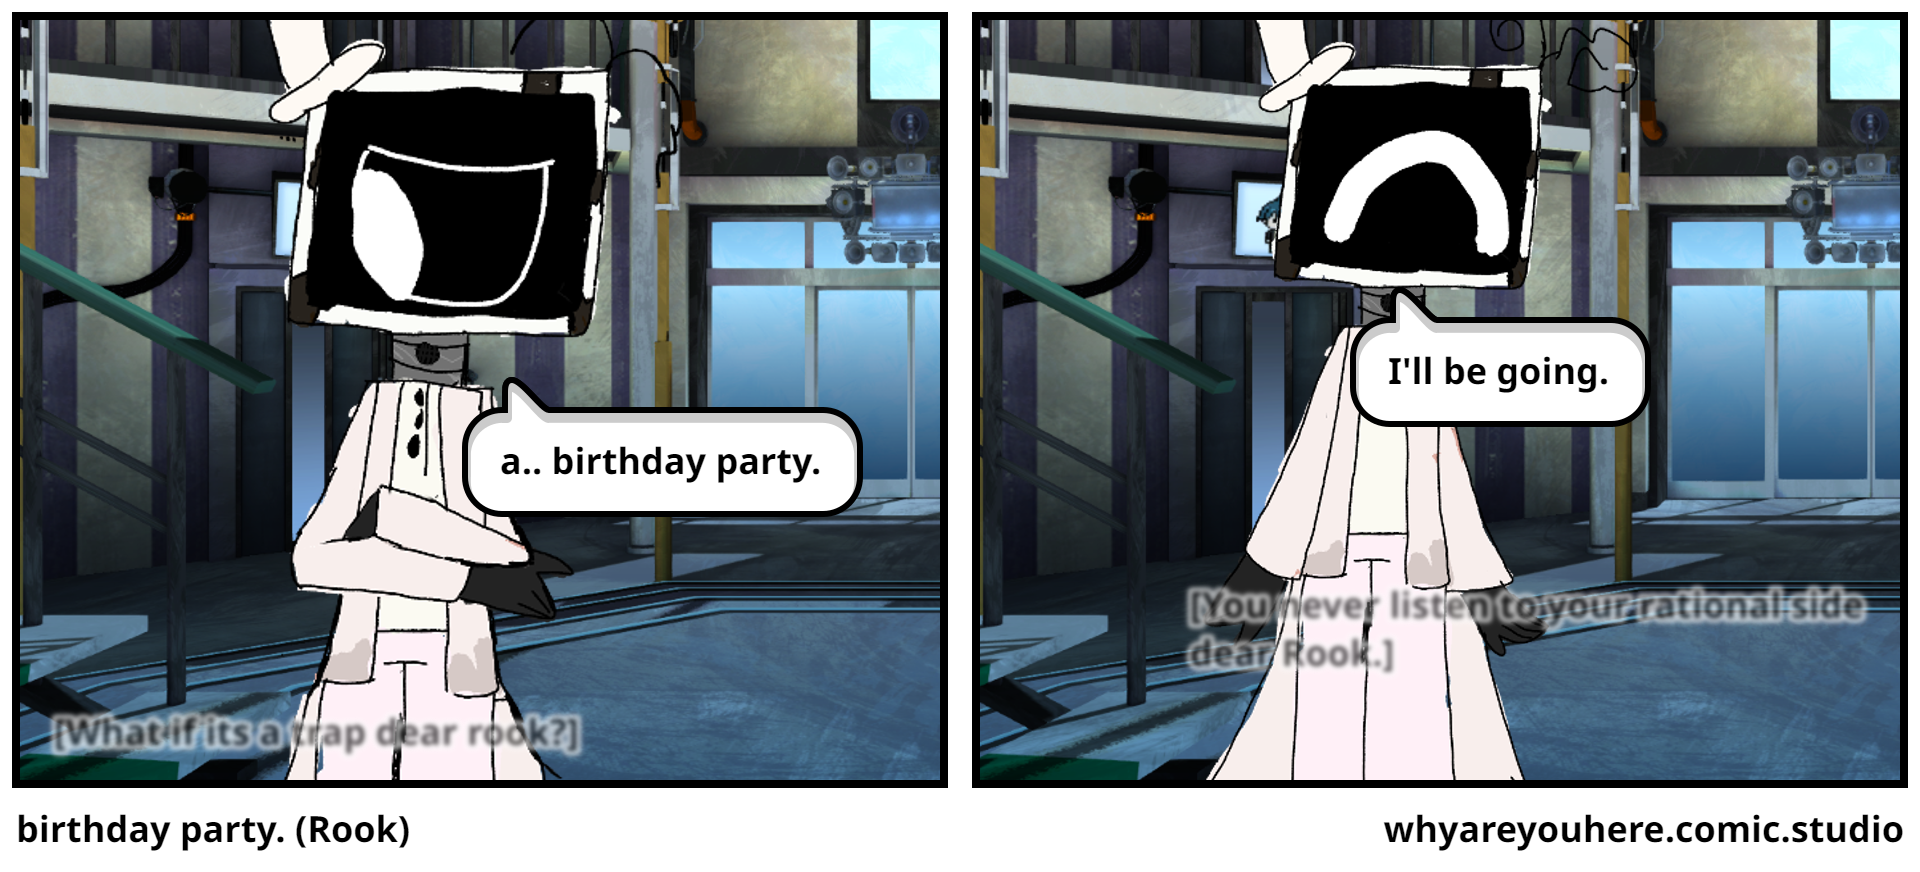 birthday party. (Rook)